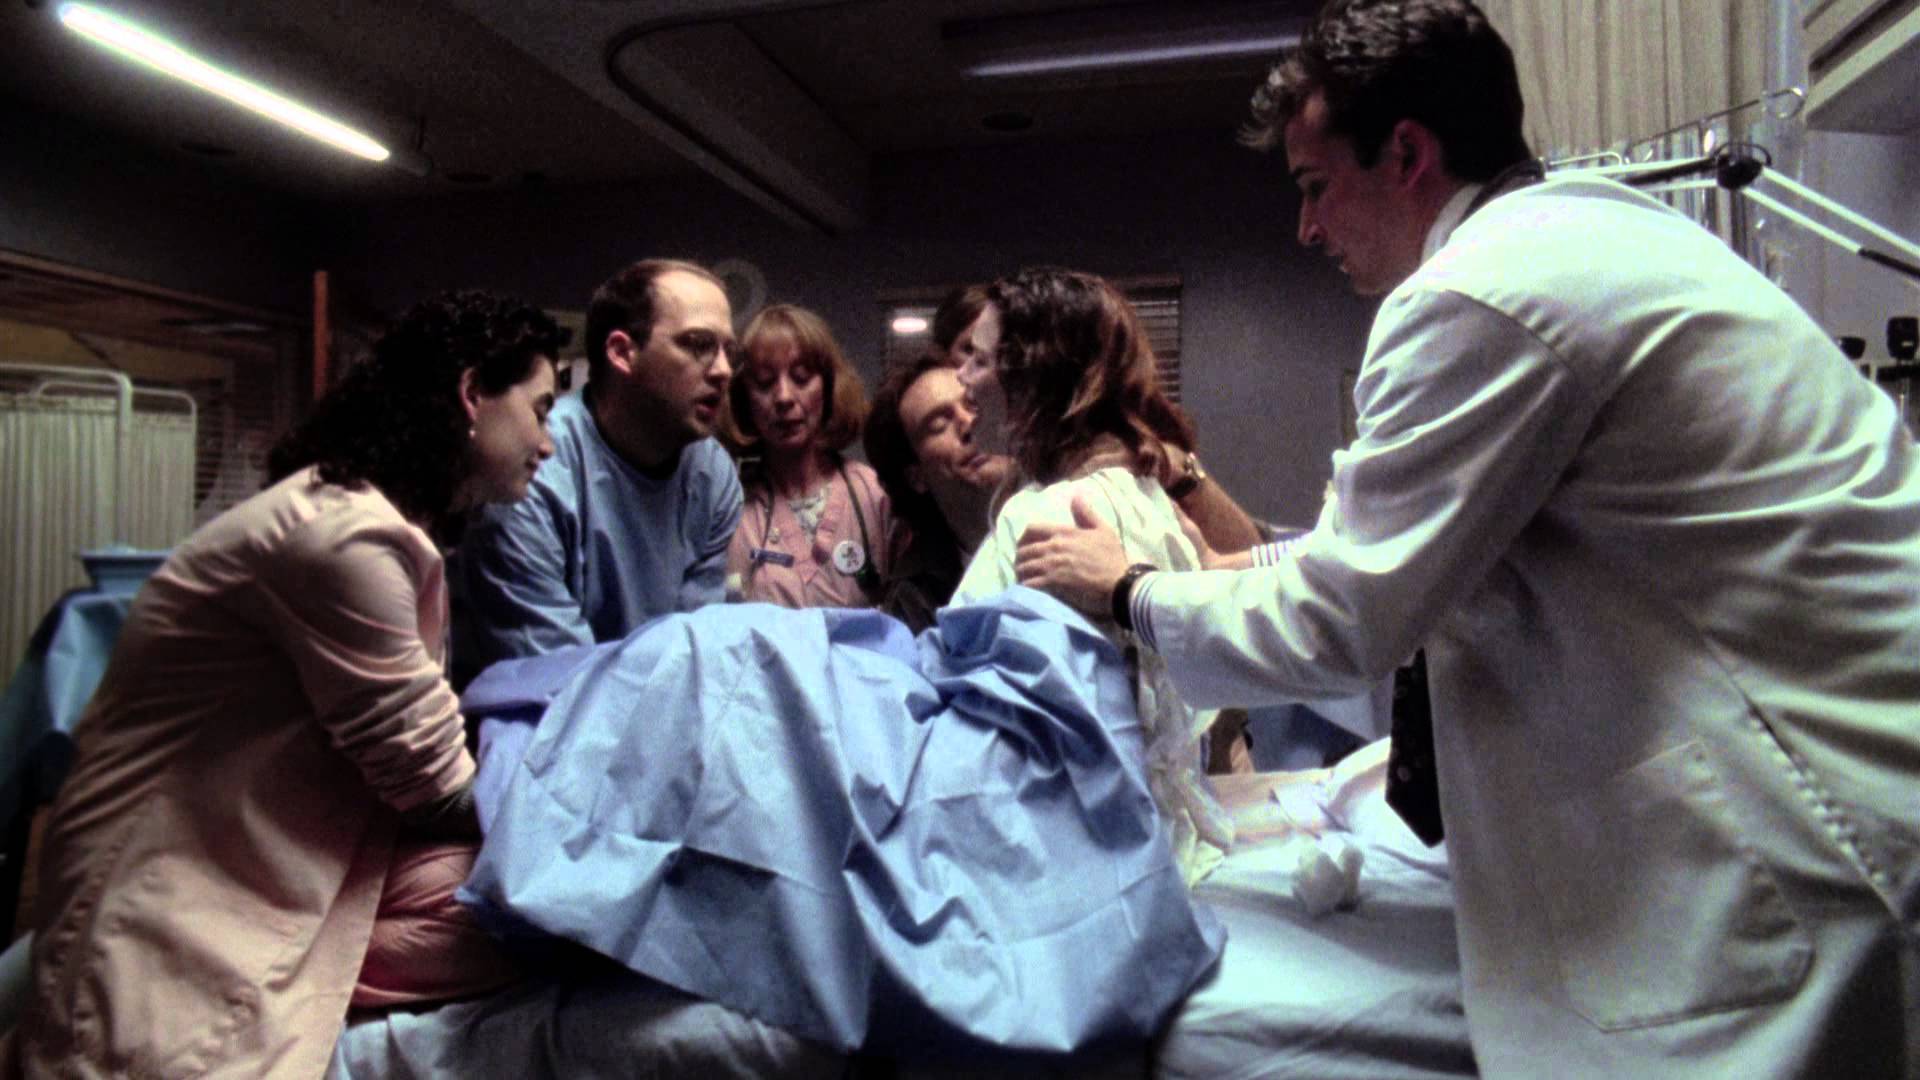 15 Facts About ER That Won't Cut Off Your Arm With A Helicopter Blade